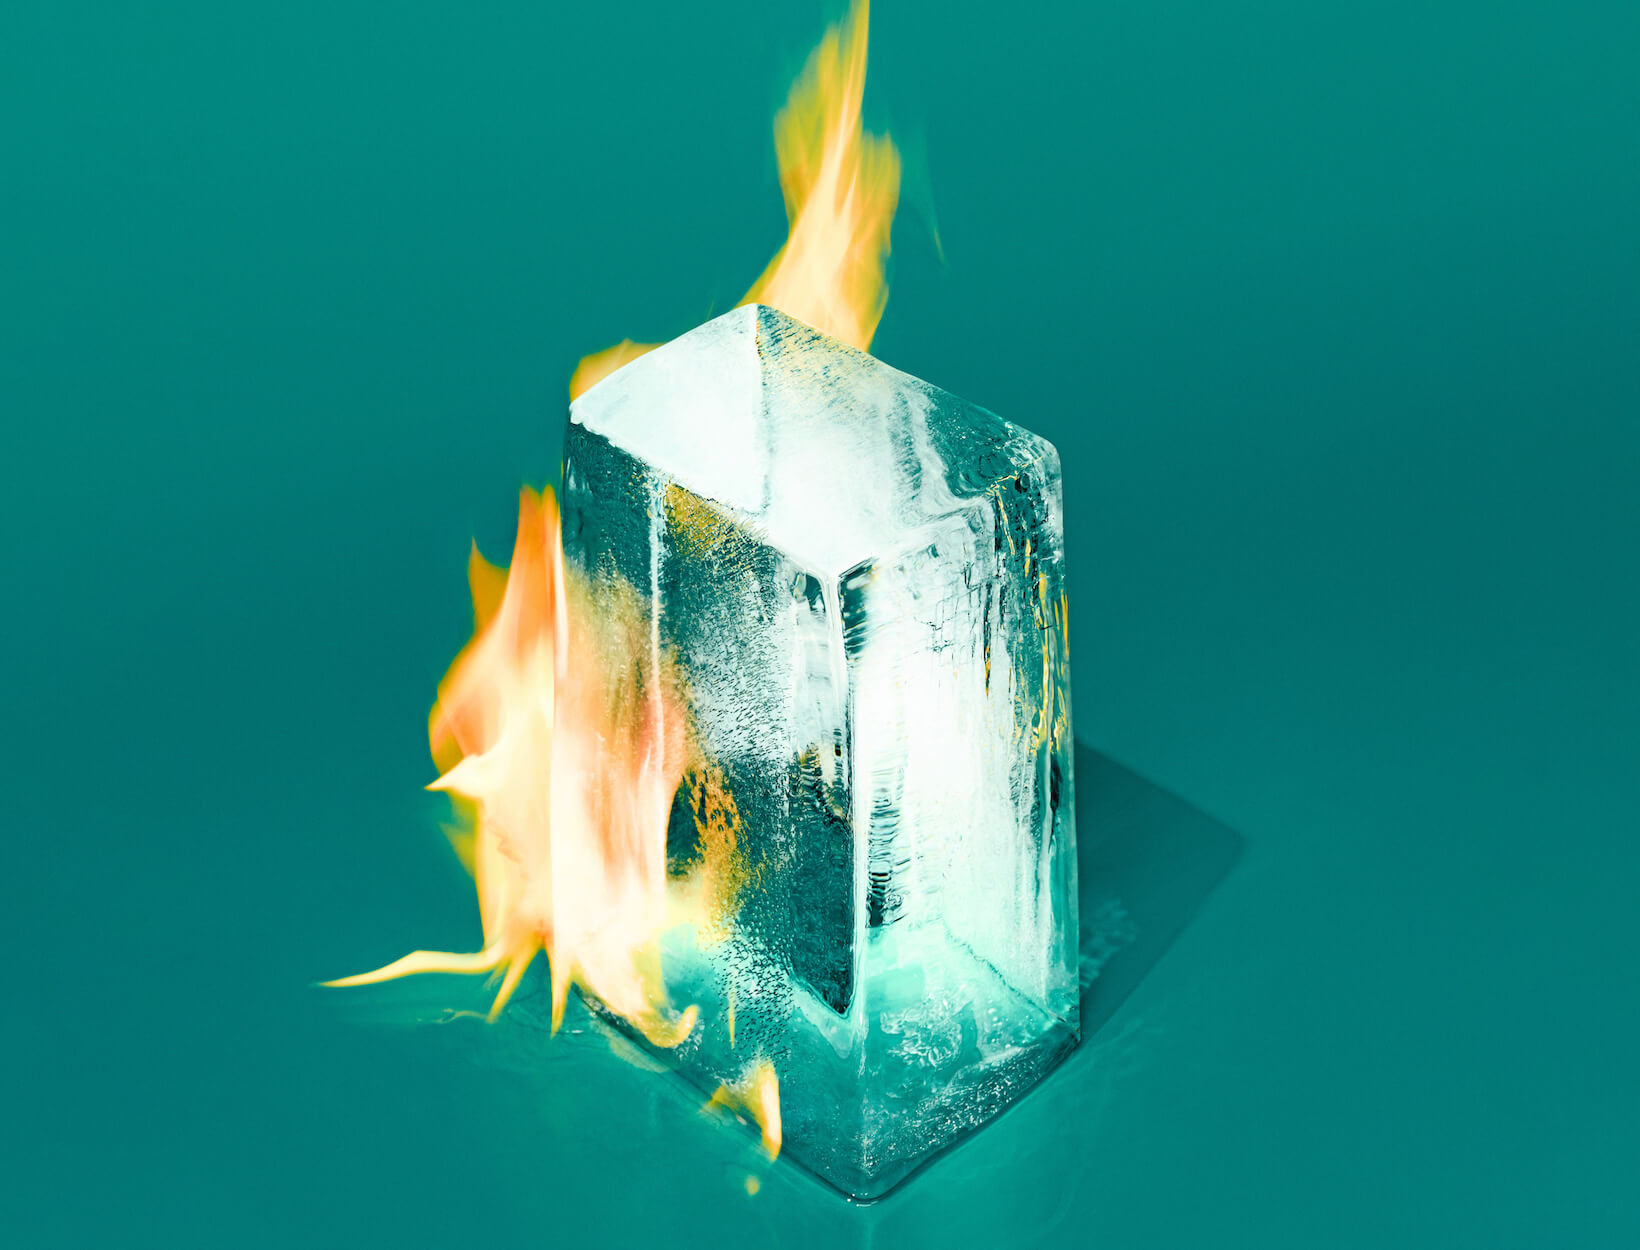 ice cube on fire